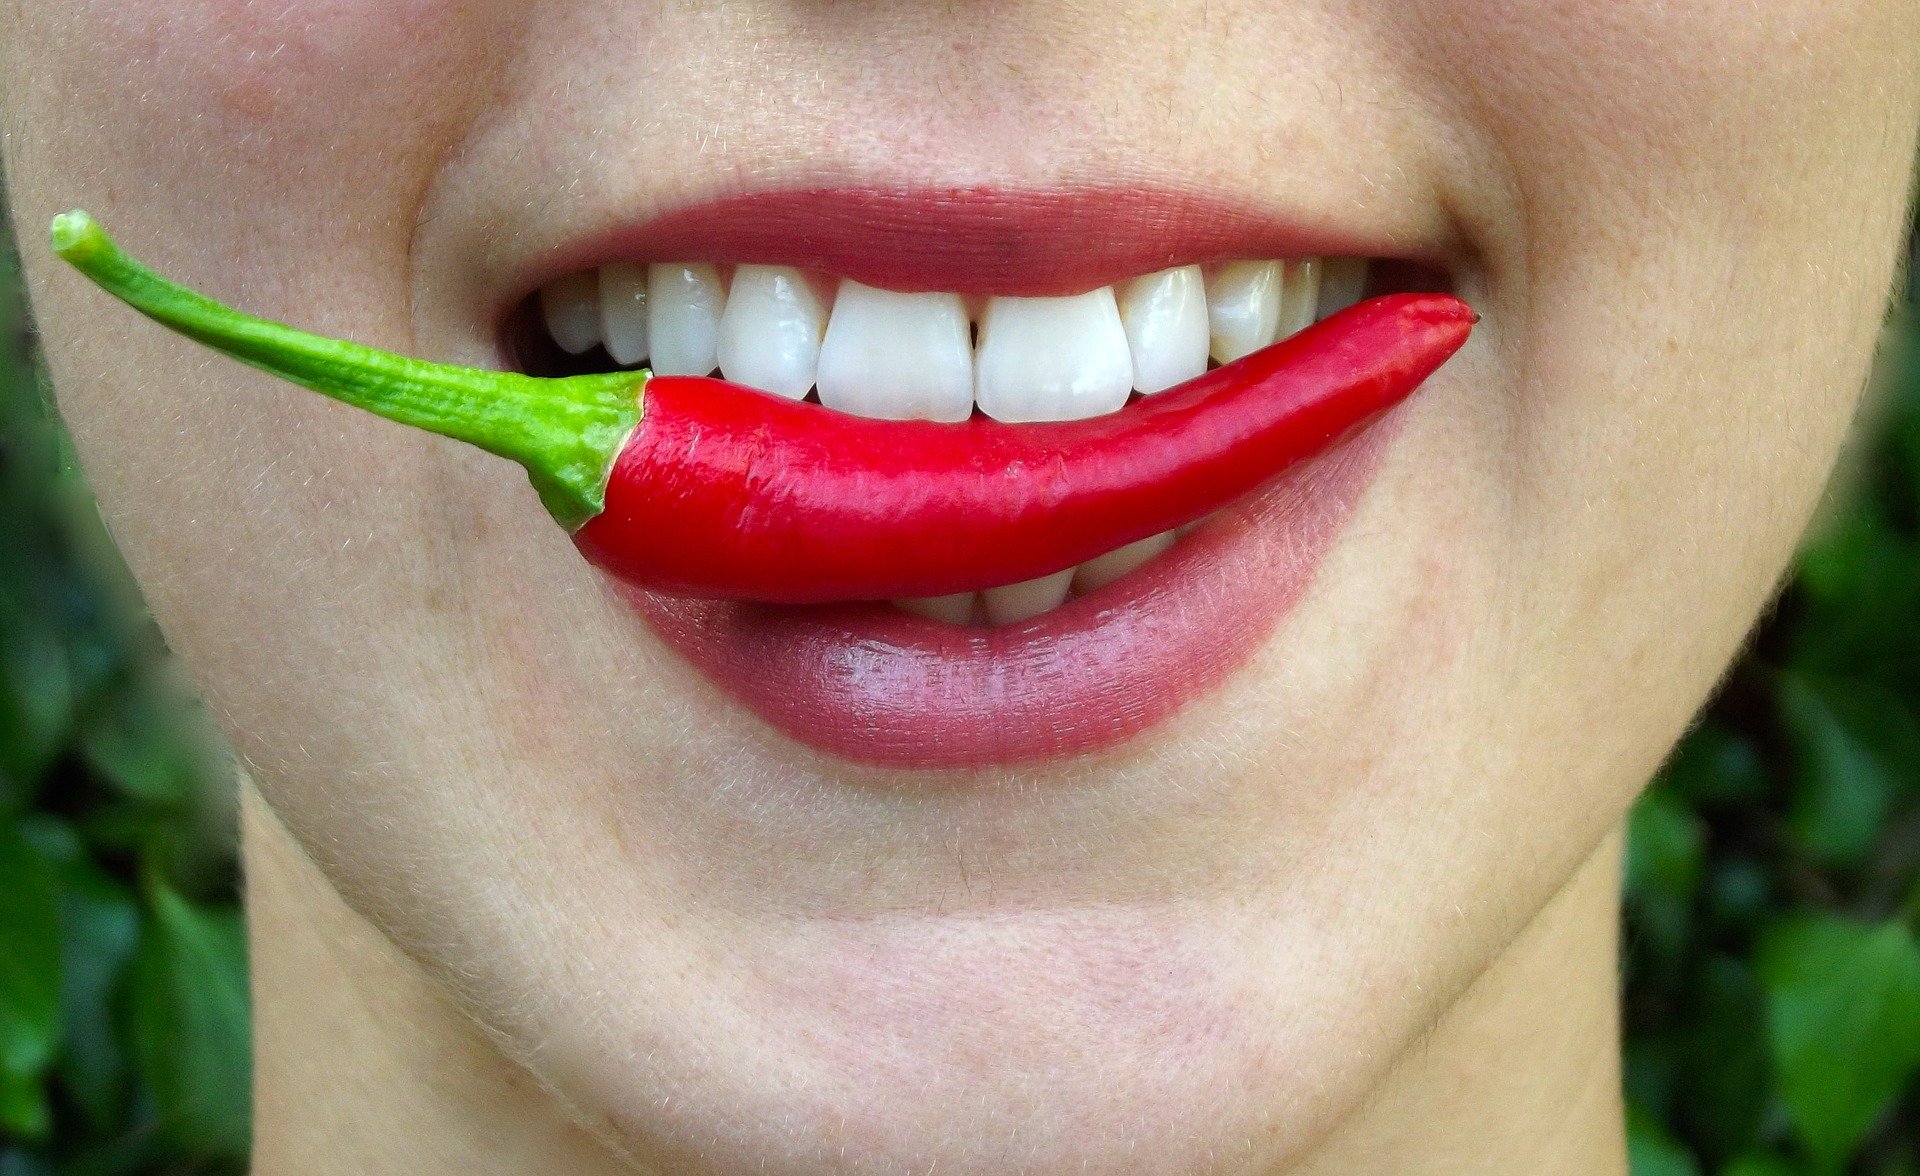 Can chili help reduce the risk of mortality?